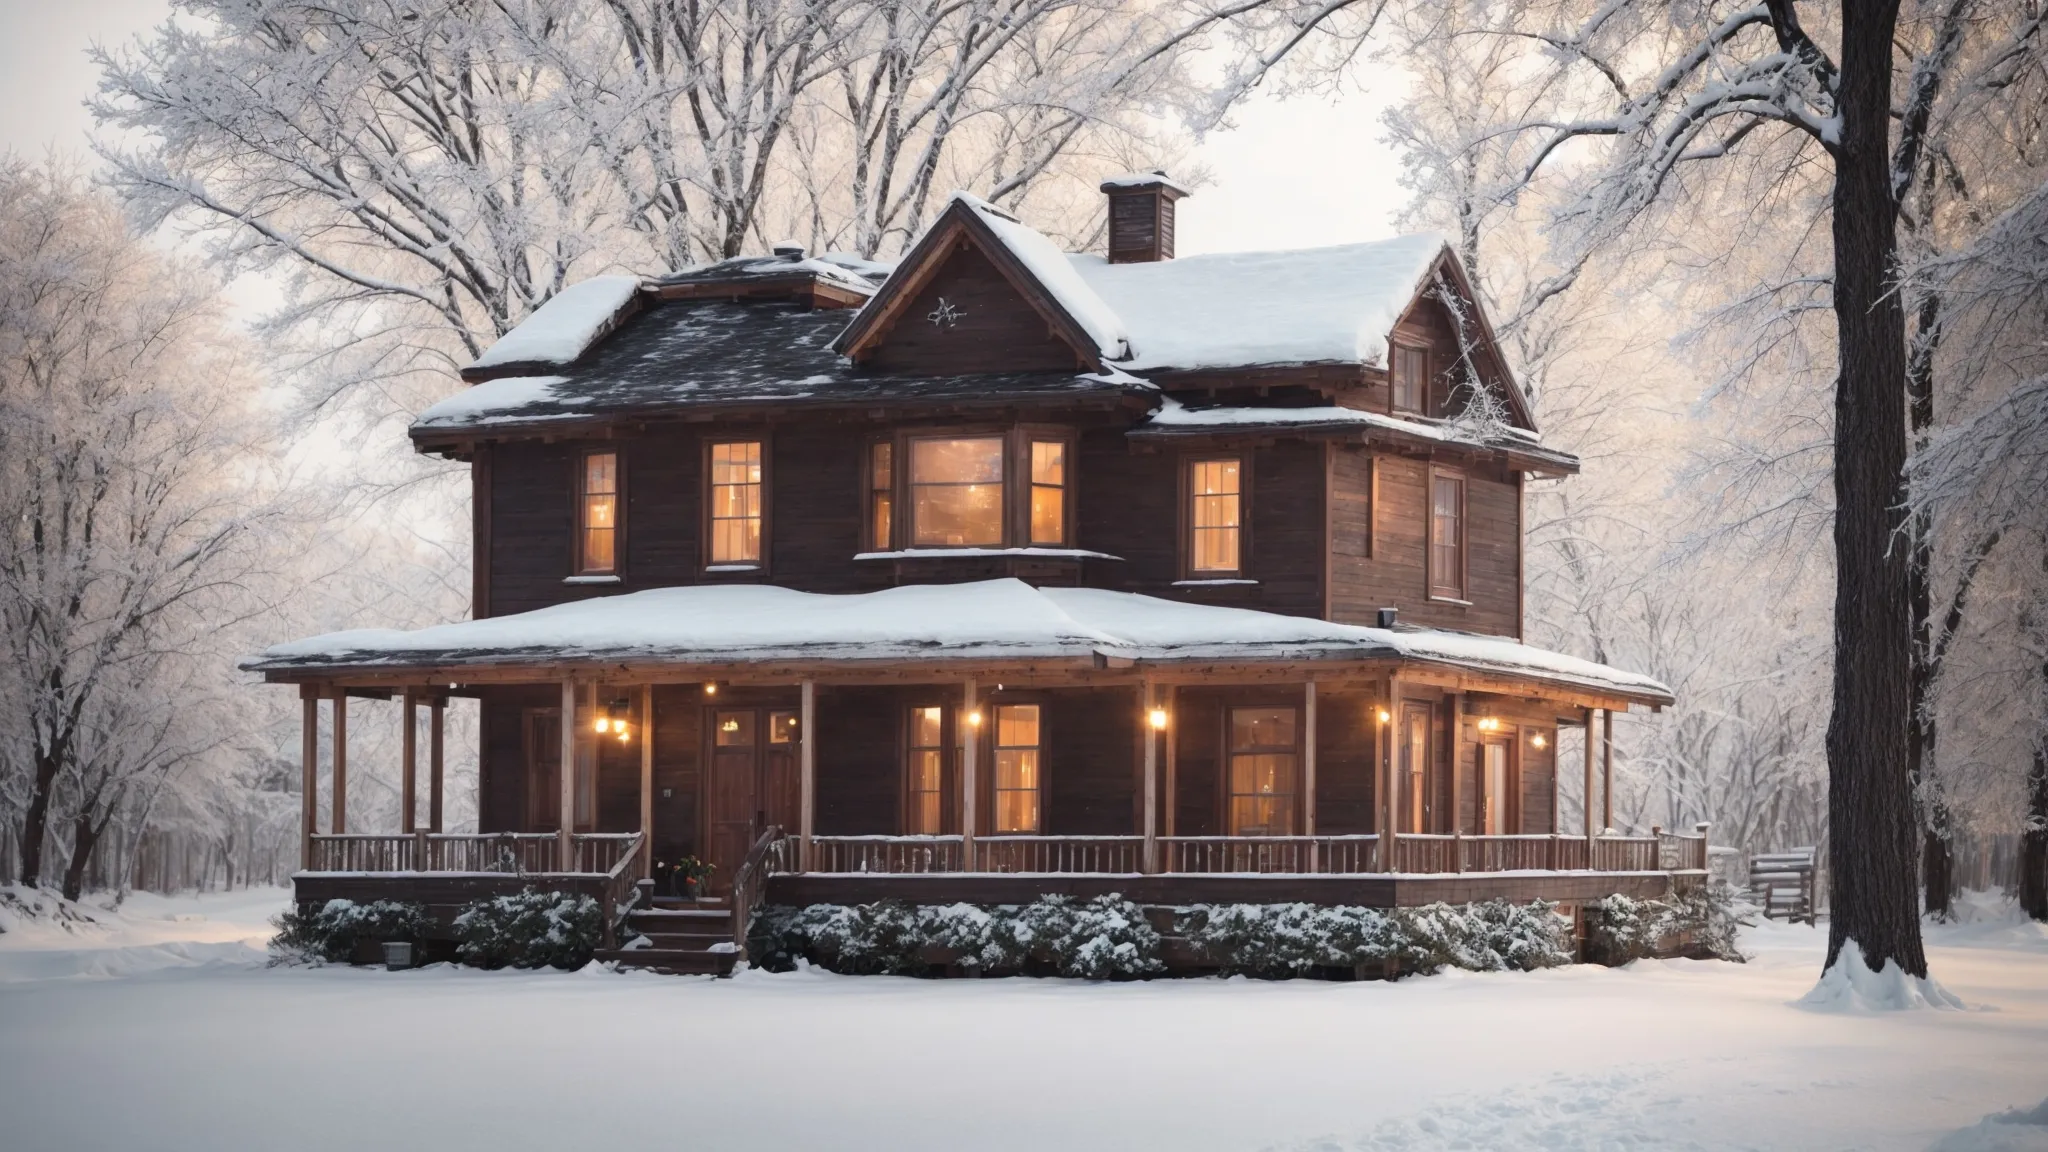 a cozy, well-maintained older house stands firm against a snowy winter backdrop, symbolizing warmth and energy efficiency.